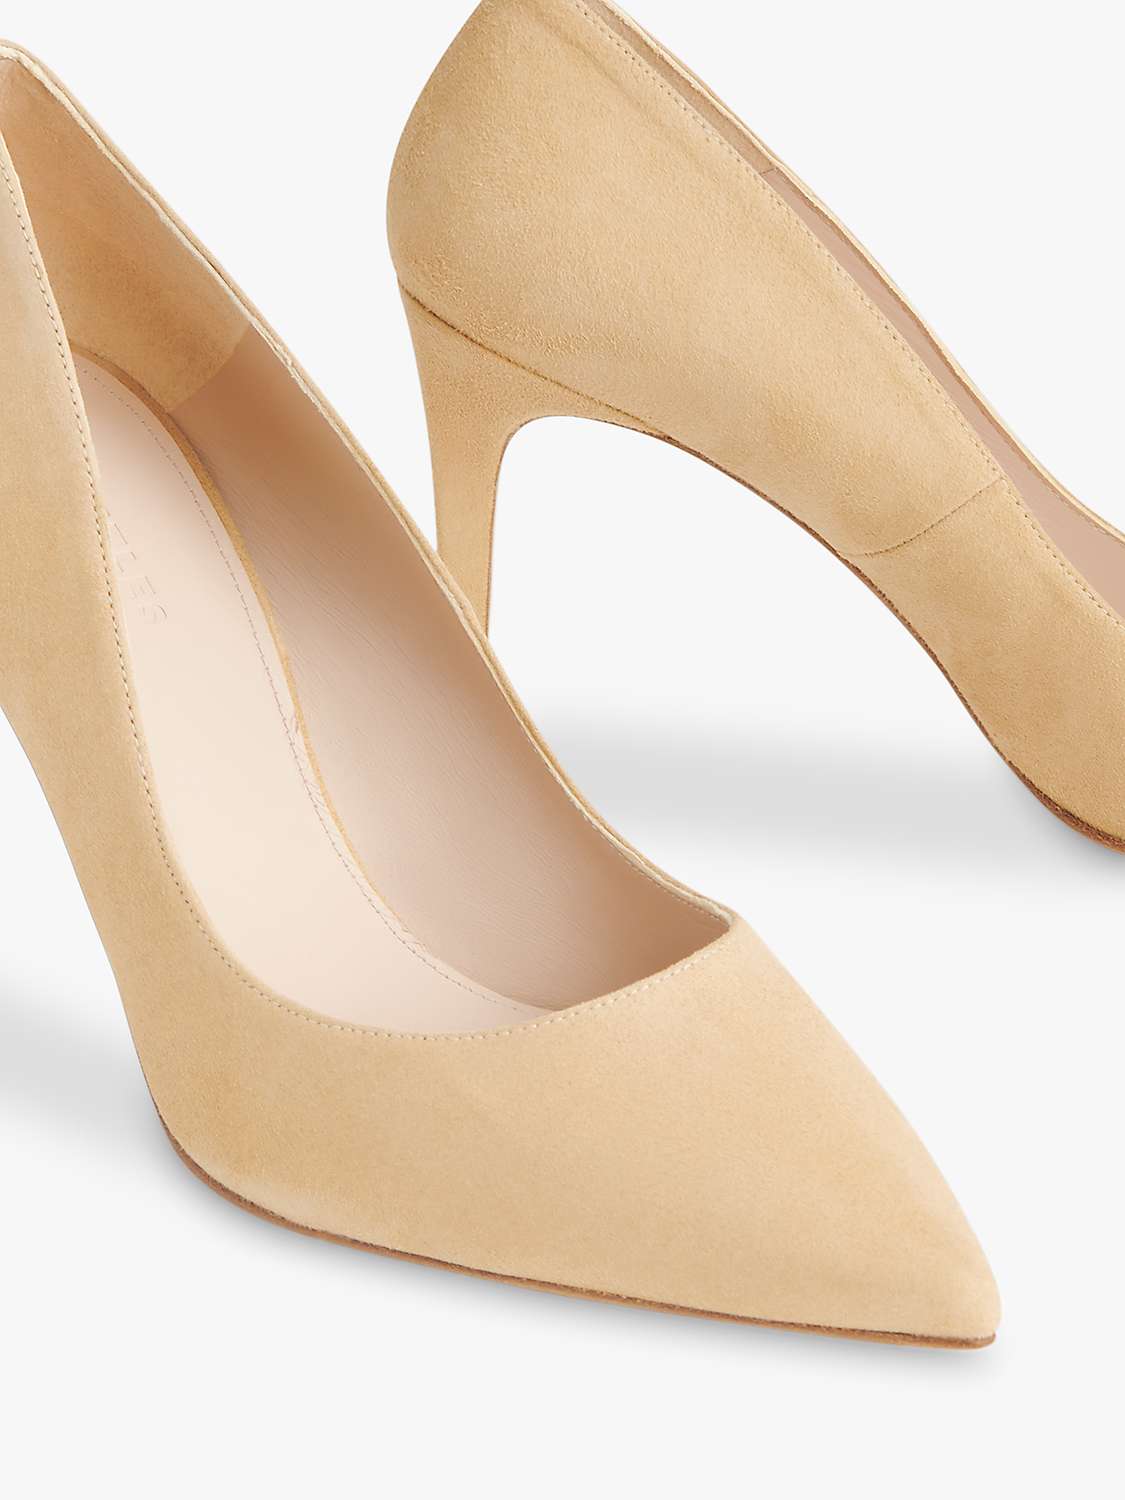 Buy Whistles Corie Suede Court Shoes, Beige Online at johnlewis.com